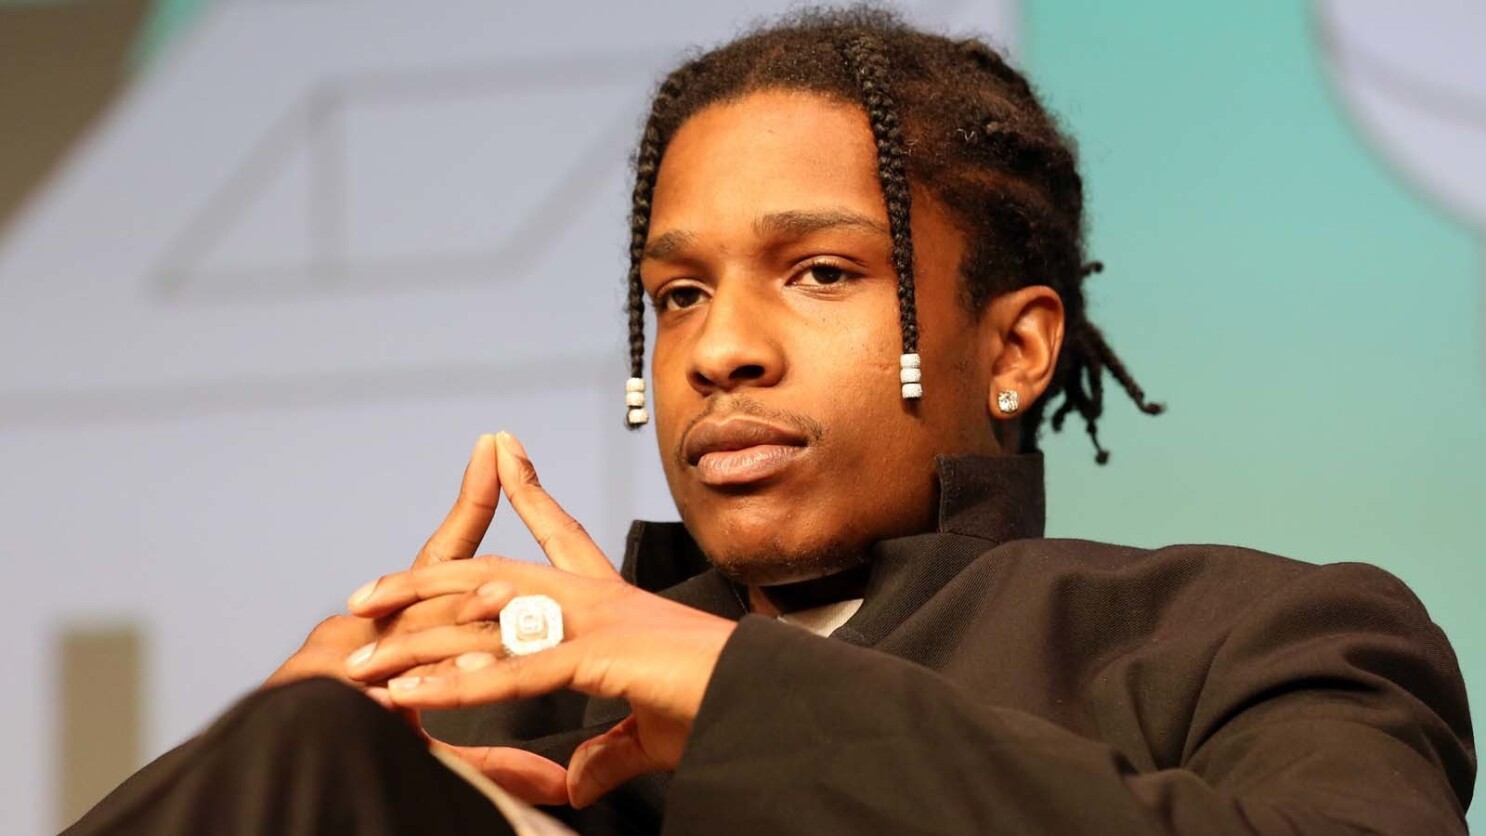 asap rocky is behind bars in sweden after street fight